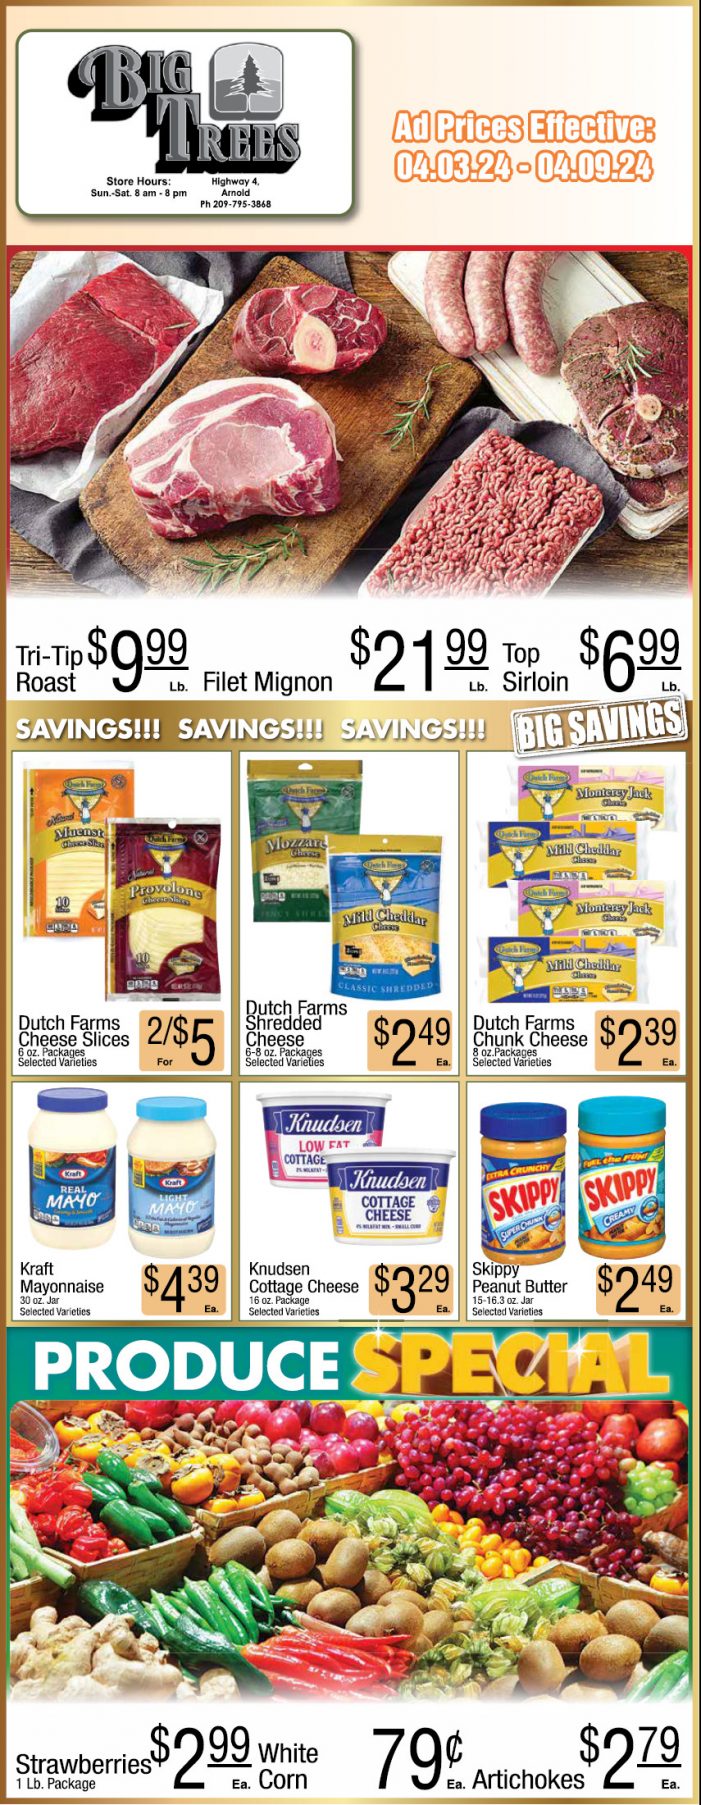 Big Trees Market Weekly Ad, Grocery, Produce, Meat & Deli Specials Through April 9th! Shop Local & Save!